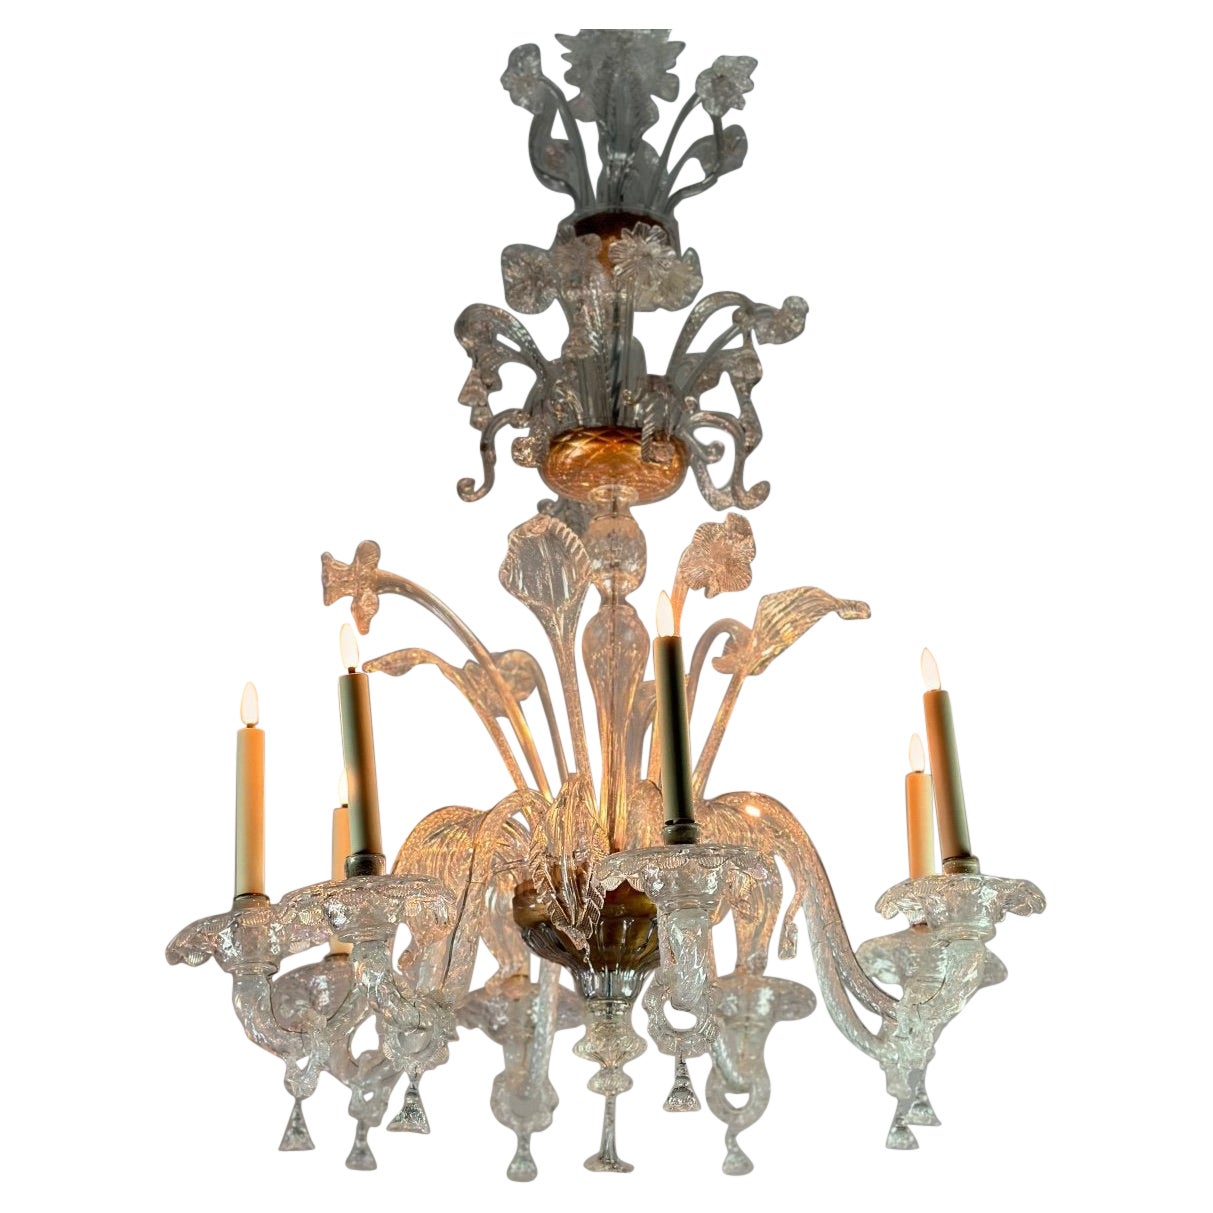 Colorless Murano Glass Chandelier 8 Arms Of Light Circa 1890 For Sale